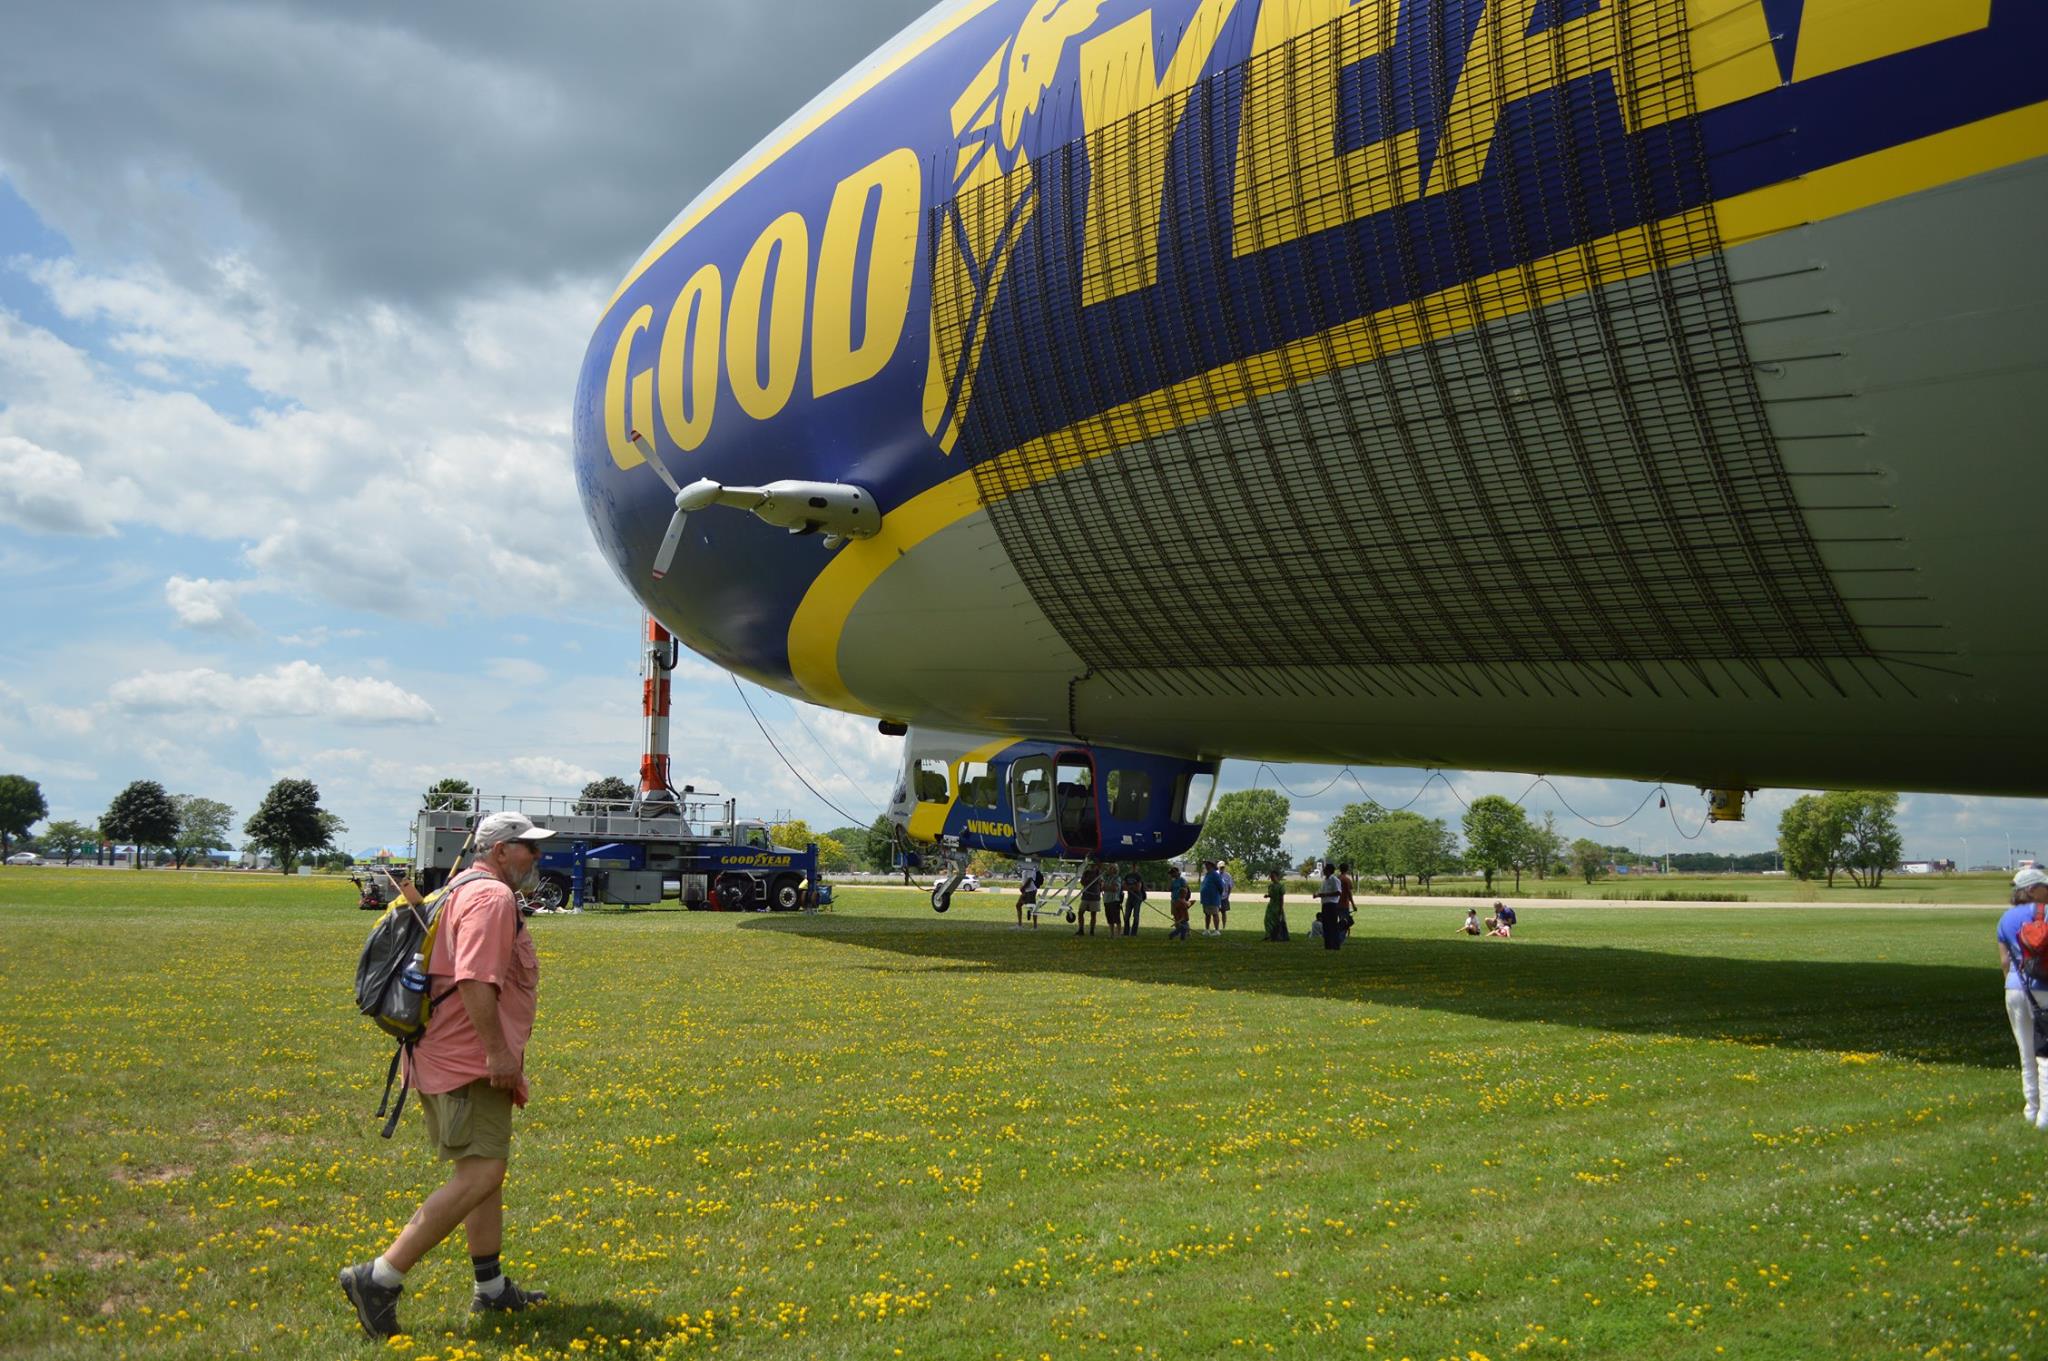 The Goodyear airship -- Wingfoot One -- at Oshkosh in July 2015. Patrick Collins